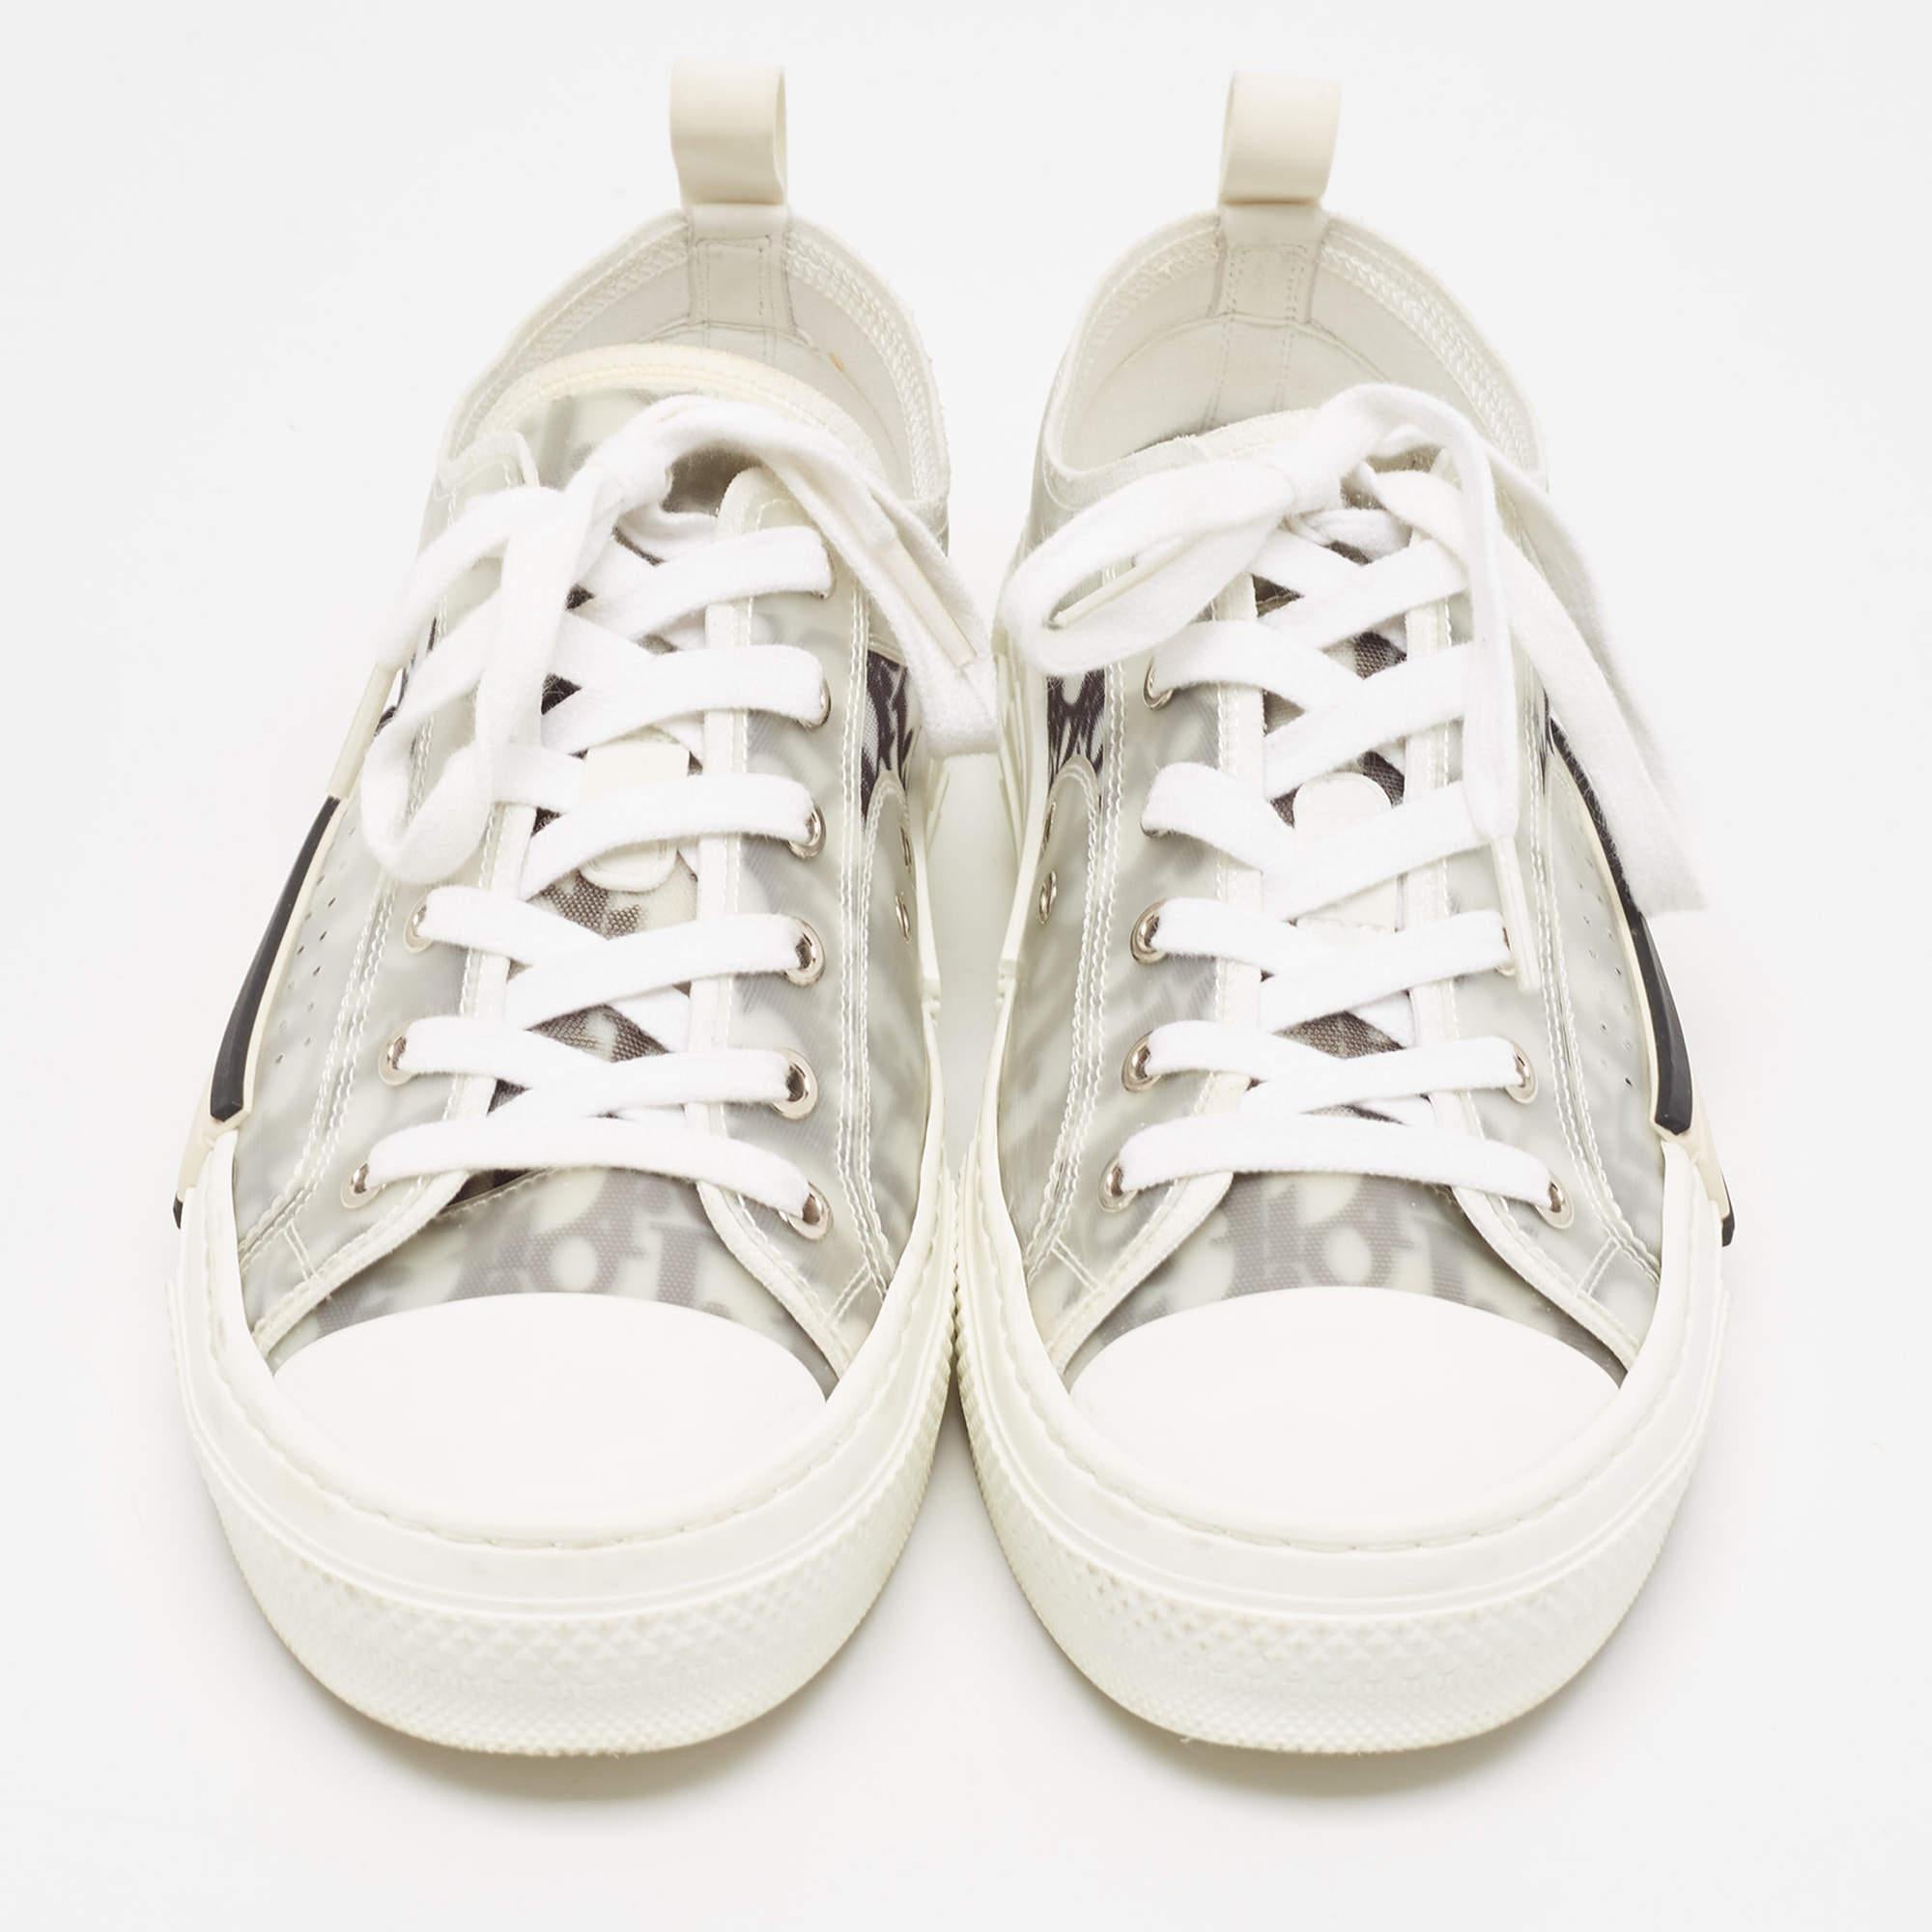 Coming in a classic silhouette, these designer sneakers are a seamless combination of luxury, comfort, and style. These sneakers are finished with signature details and comfortable insoles.

Includes
Original Dustbag, Original Box, Invoice, Extra